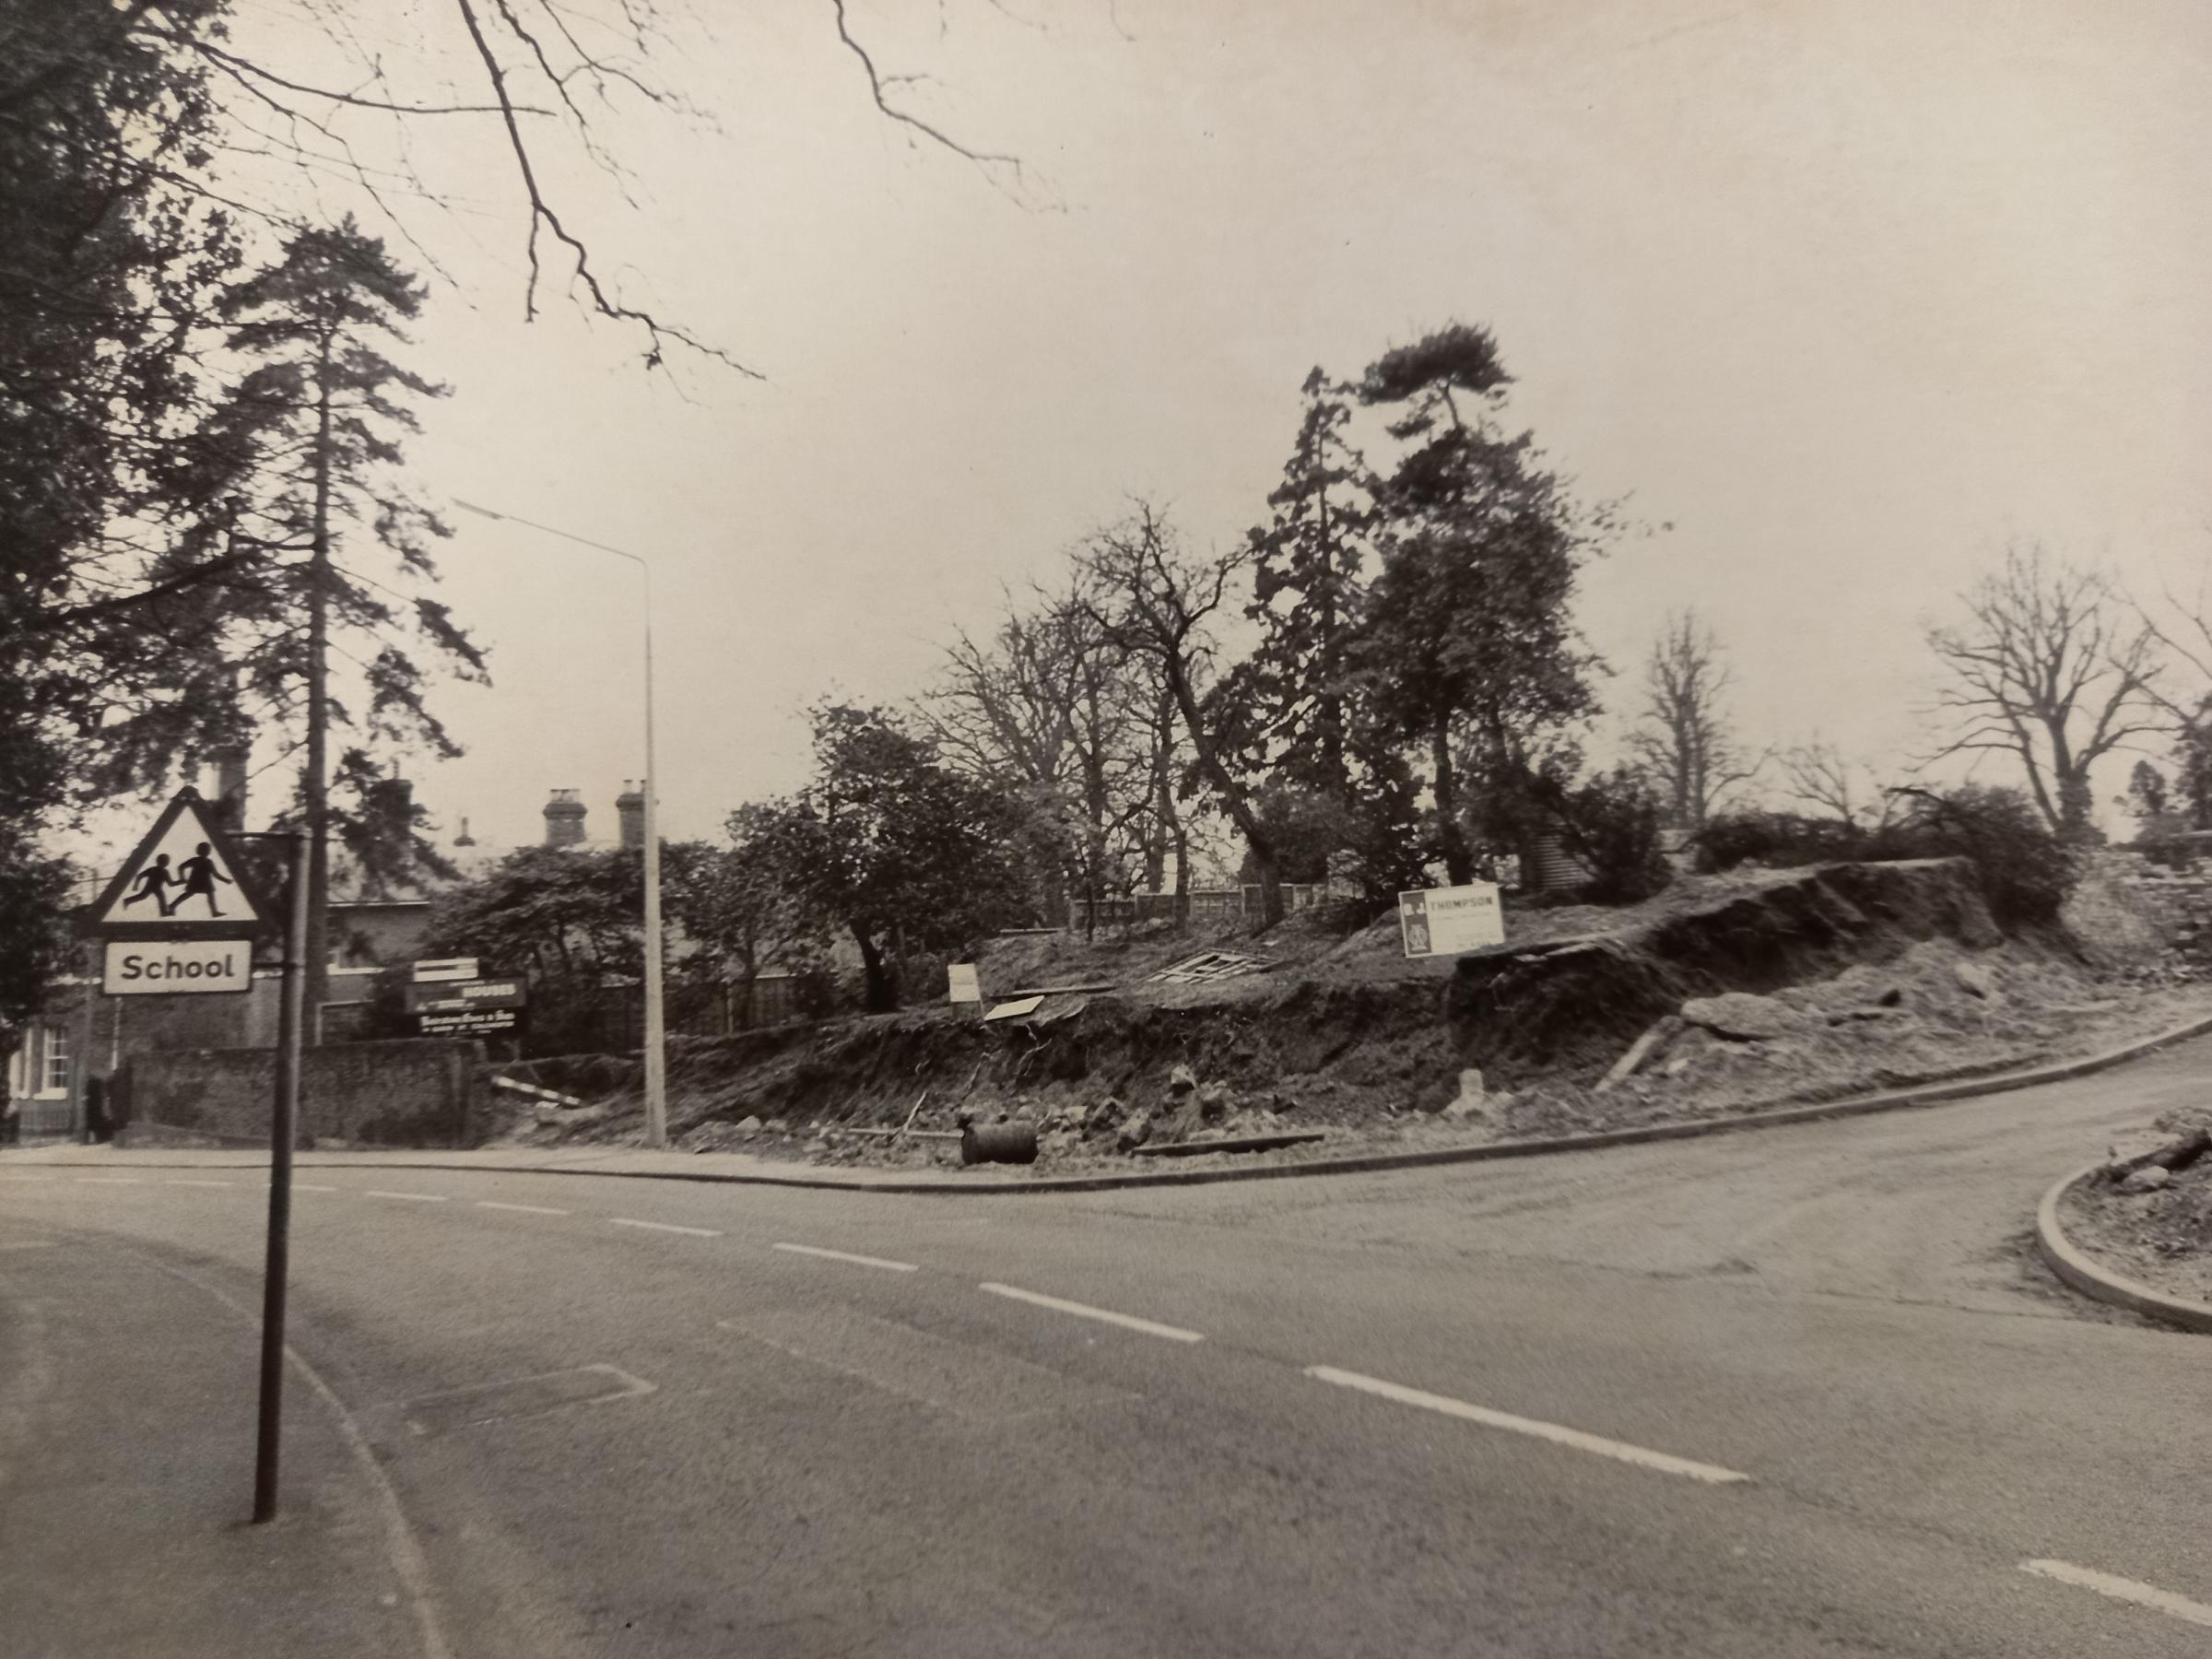 Lexden Road pictured back in 1971